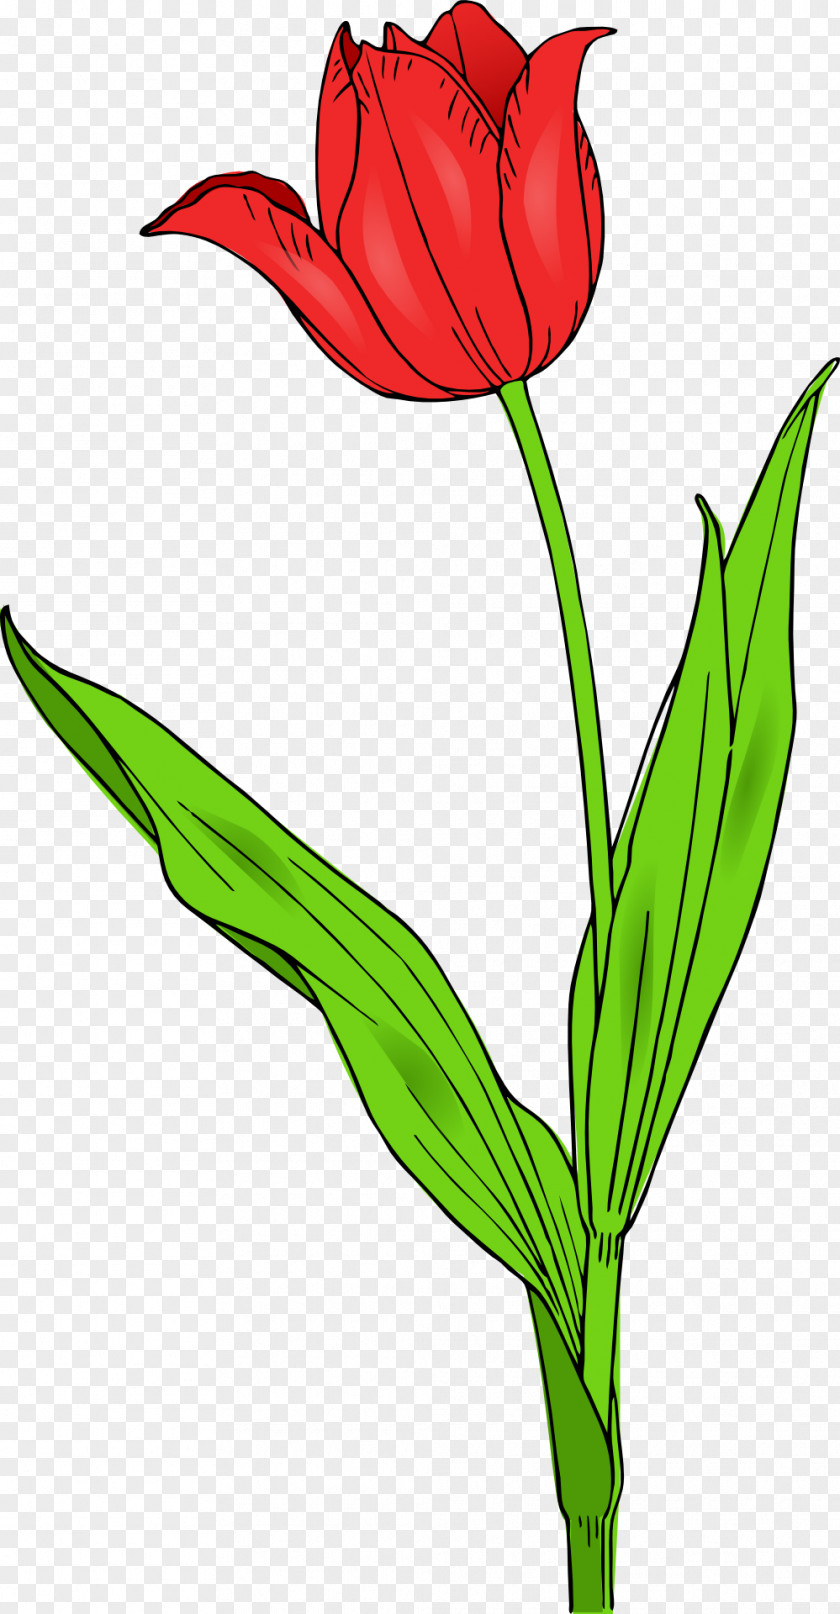 Spring Background Clipart Flower Tulipa Gesneriana Clip Art PNG